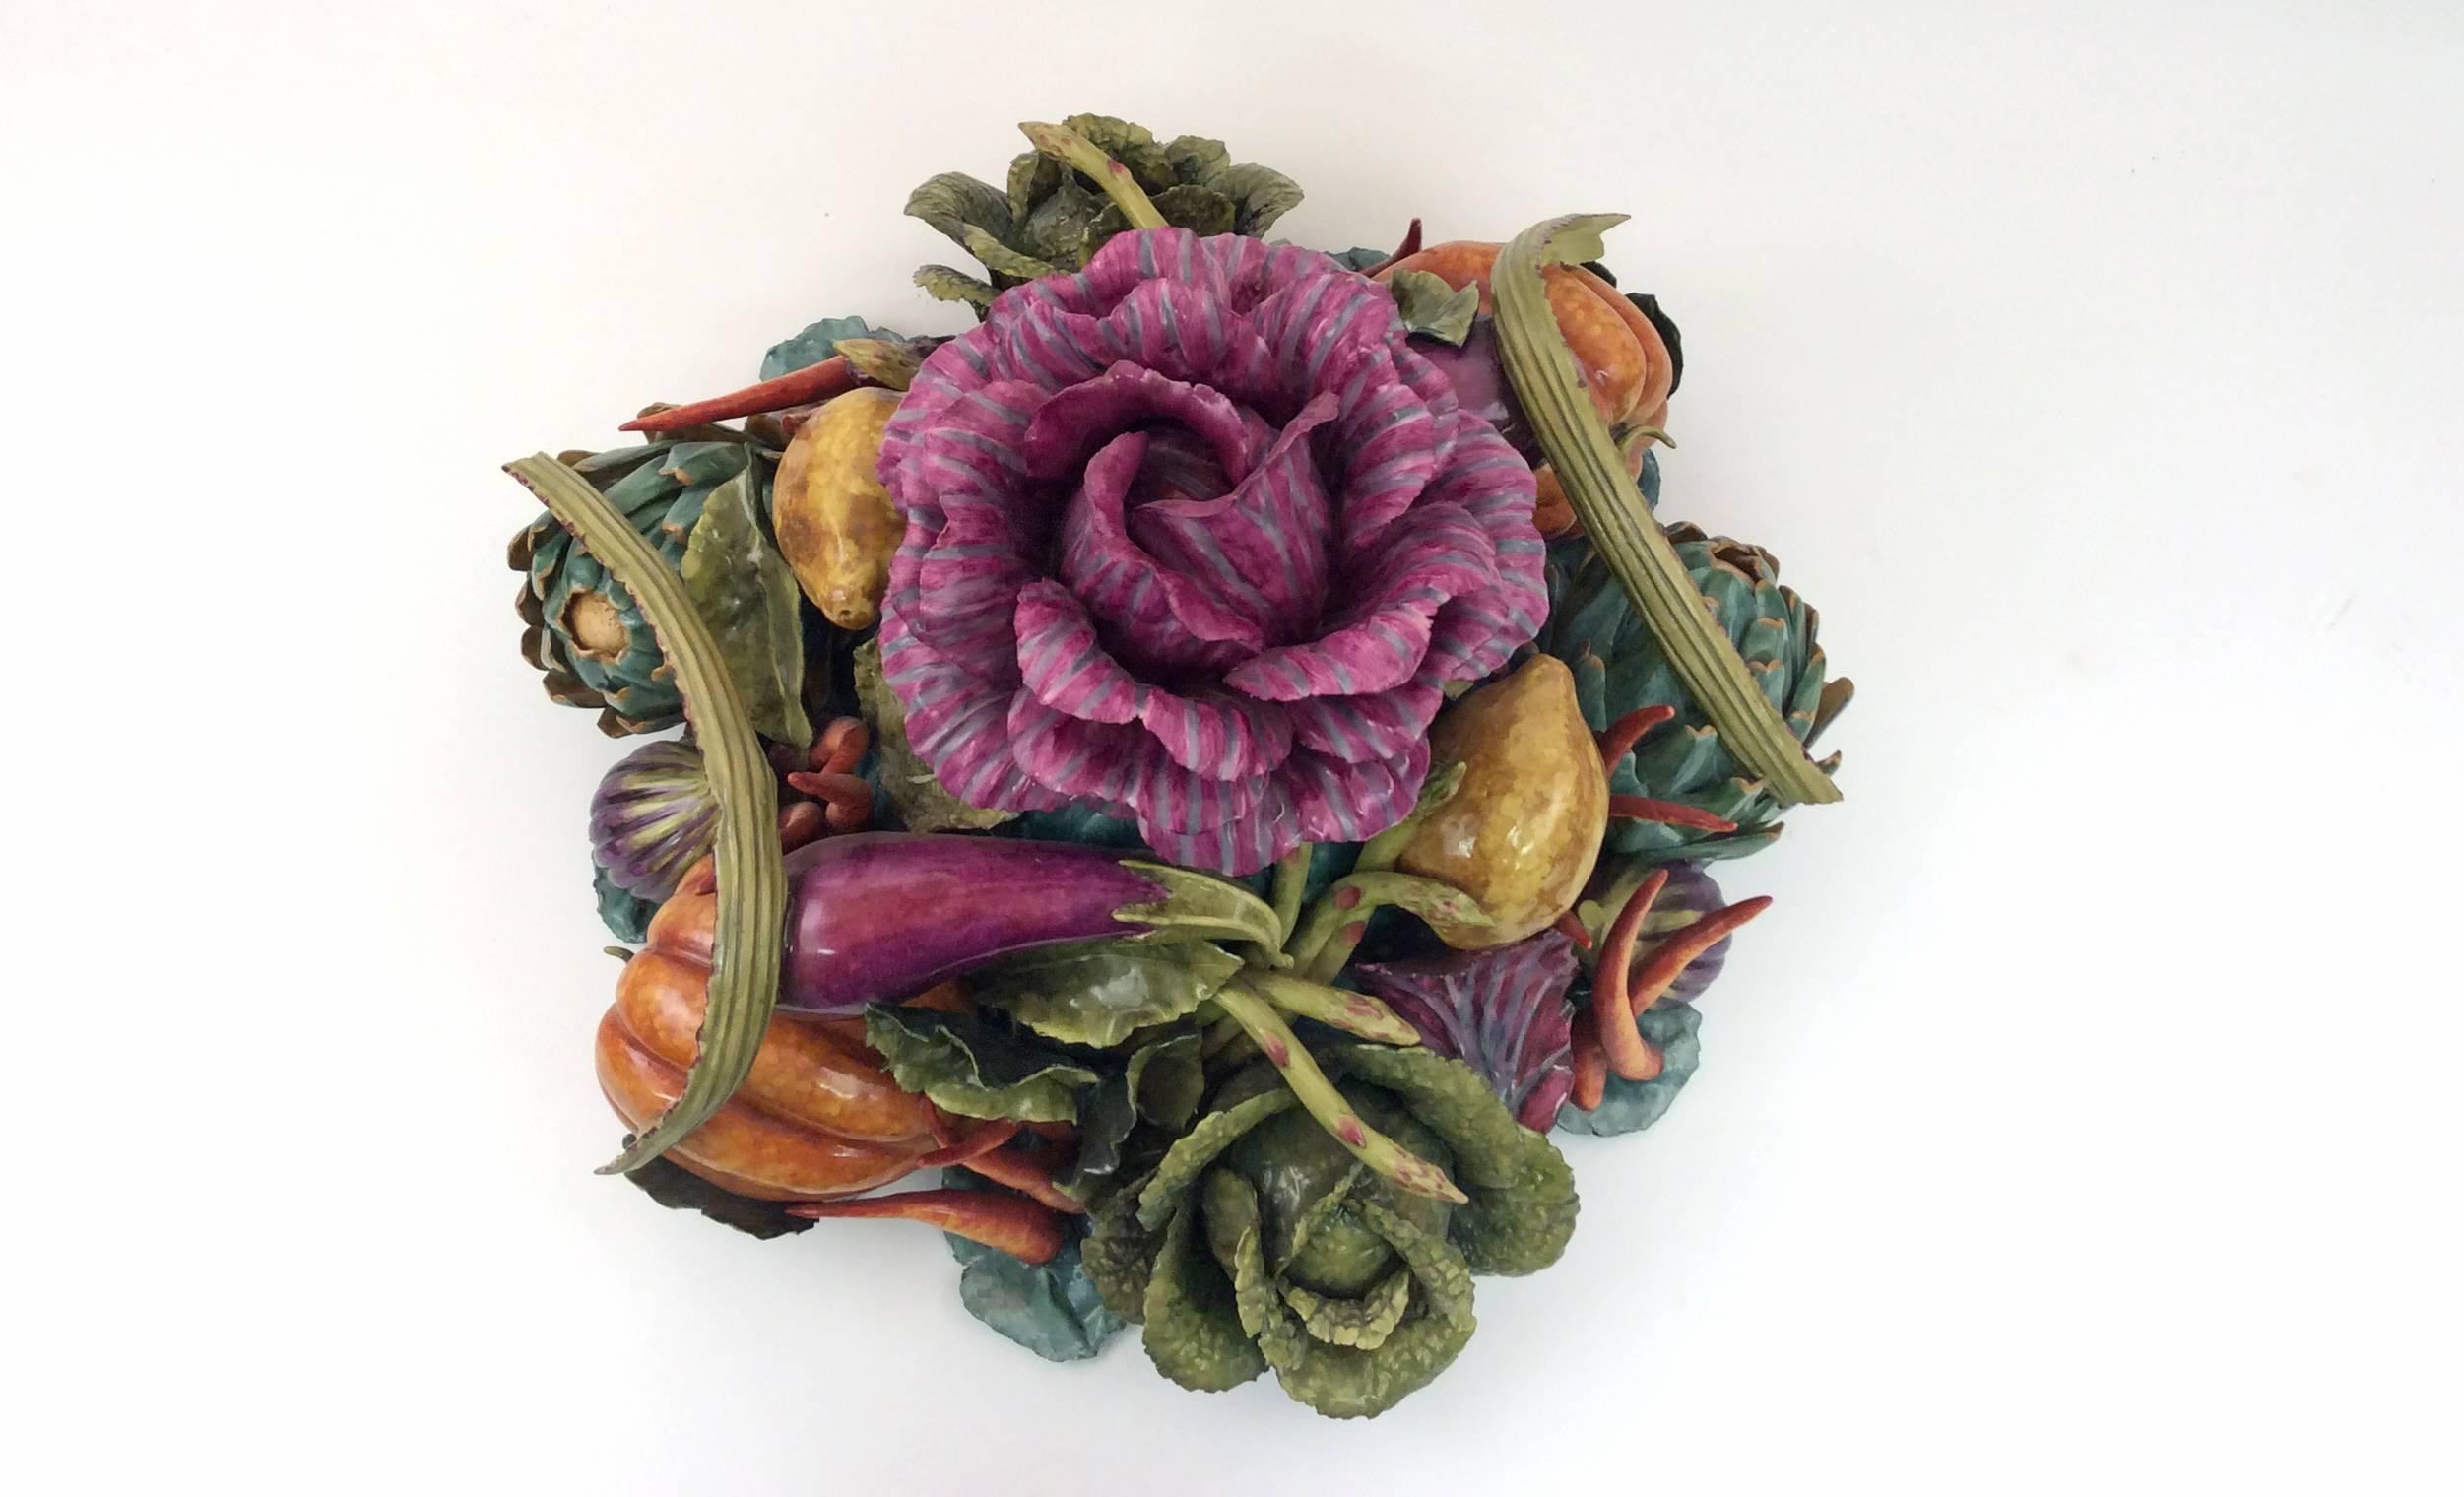 This centerpiece is composed of vegetables seen in Jan De Heem 17th century paintings. This is a one of kind handcrafted piece.
Katherine Houston is a living artist working in an 18th century technique, adapting the techniques and masterful